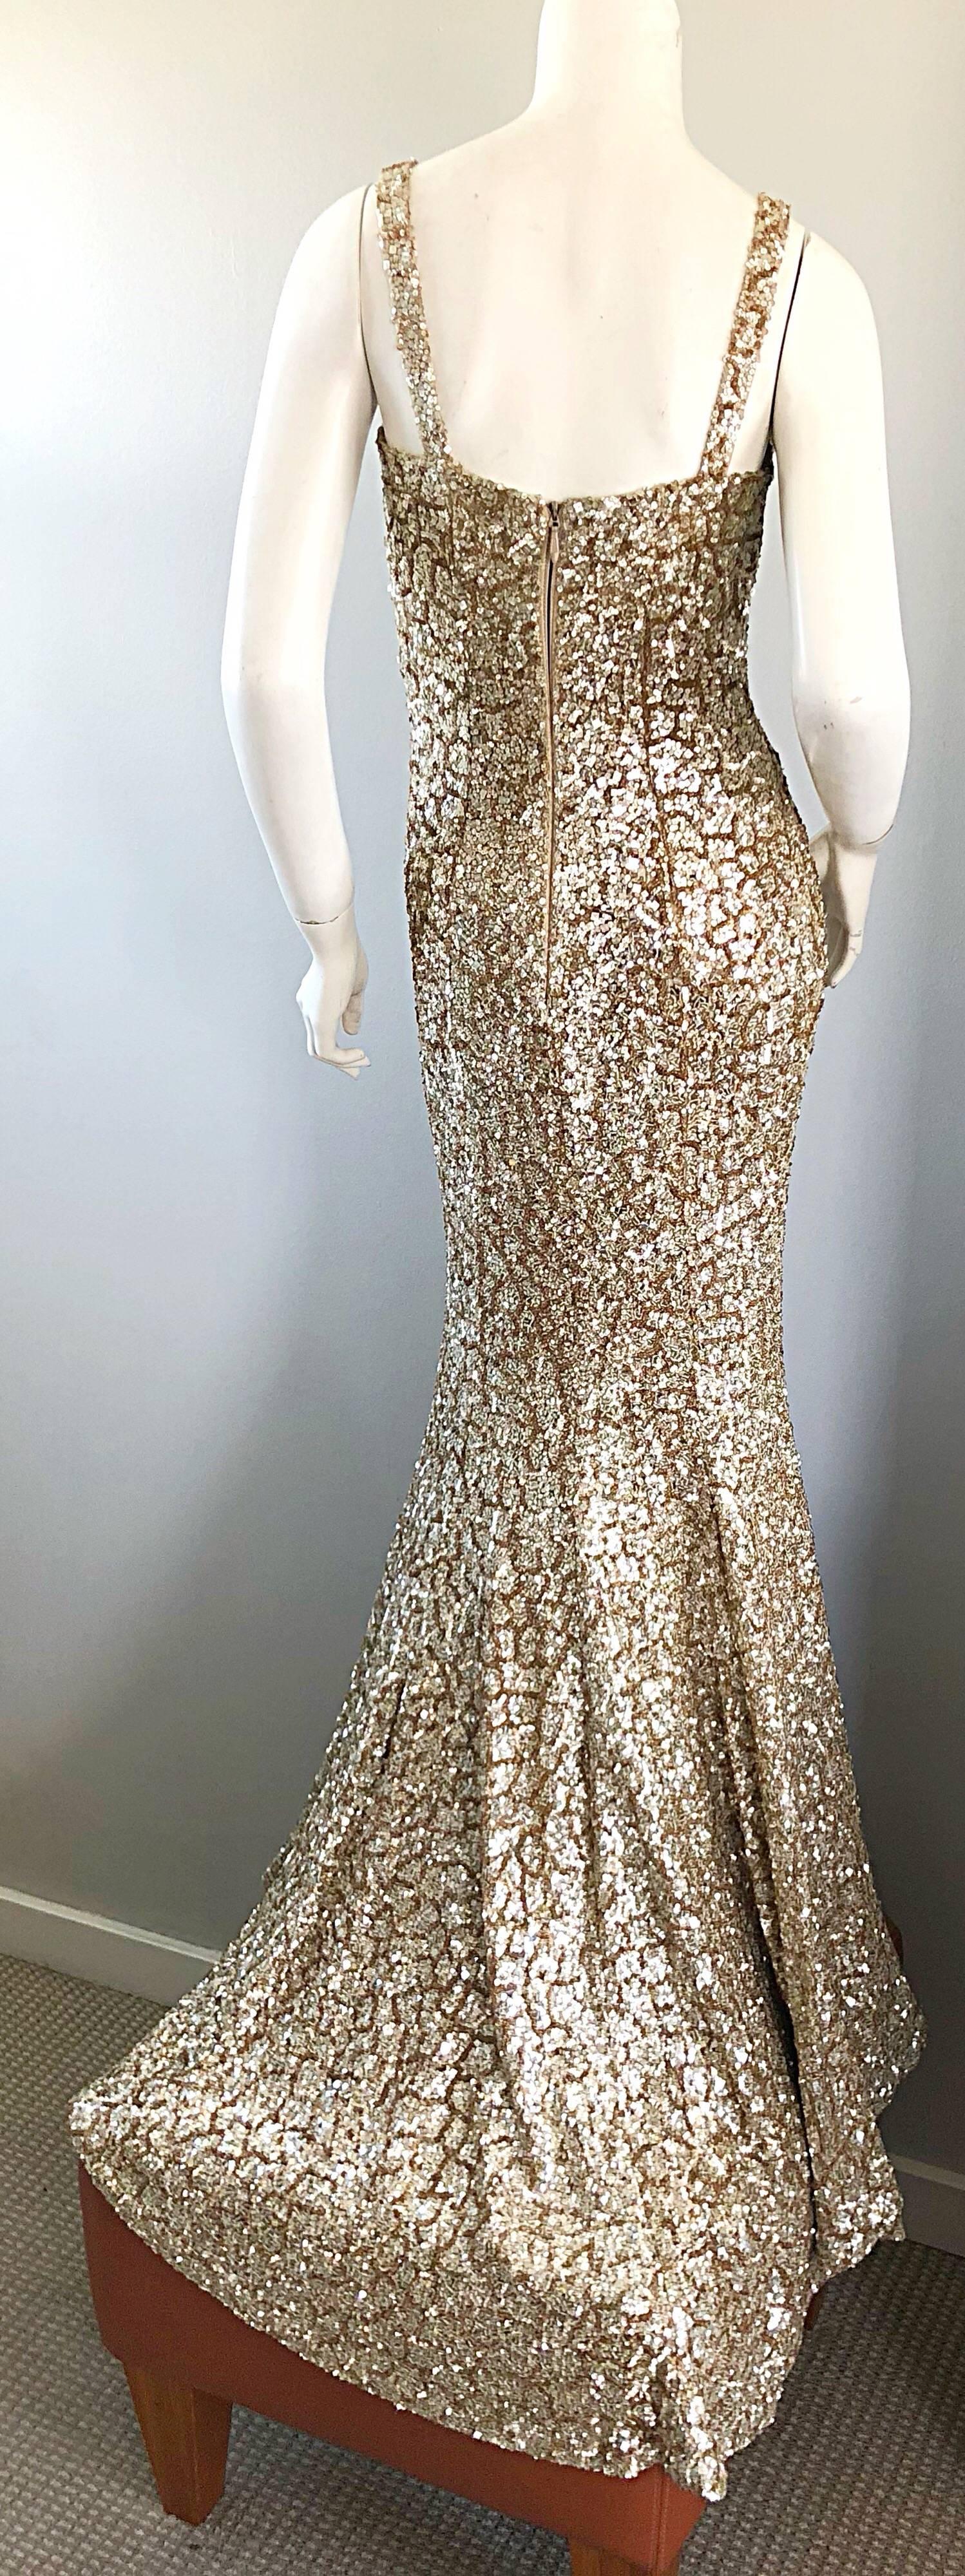 Monique Lhuillier Gorgeous Resort 2012 Gold Rose Gold Full Sequin Trained Gown  6